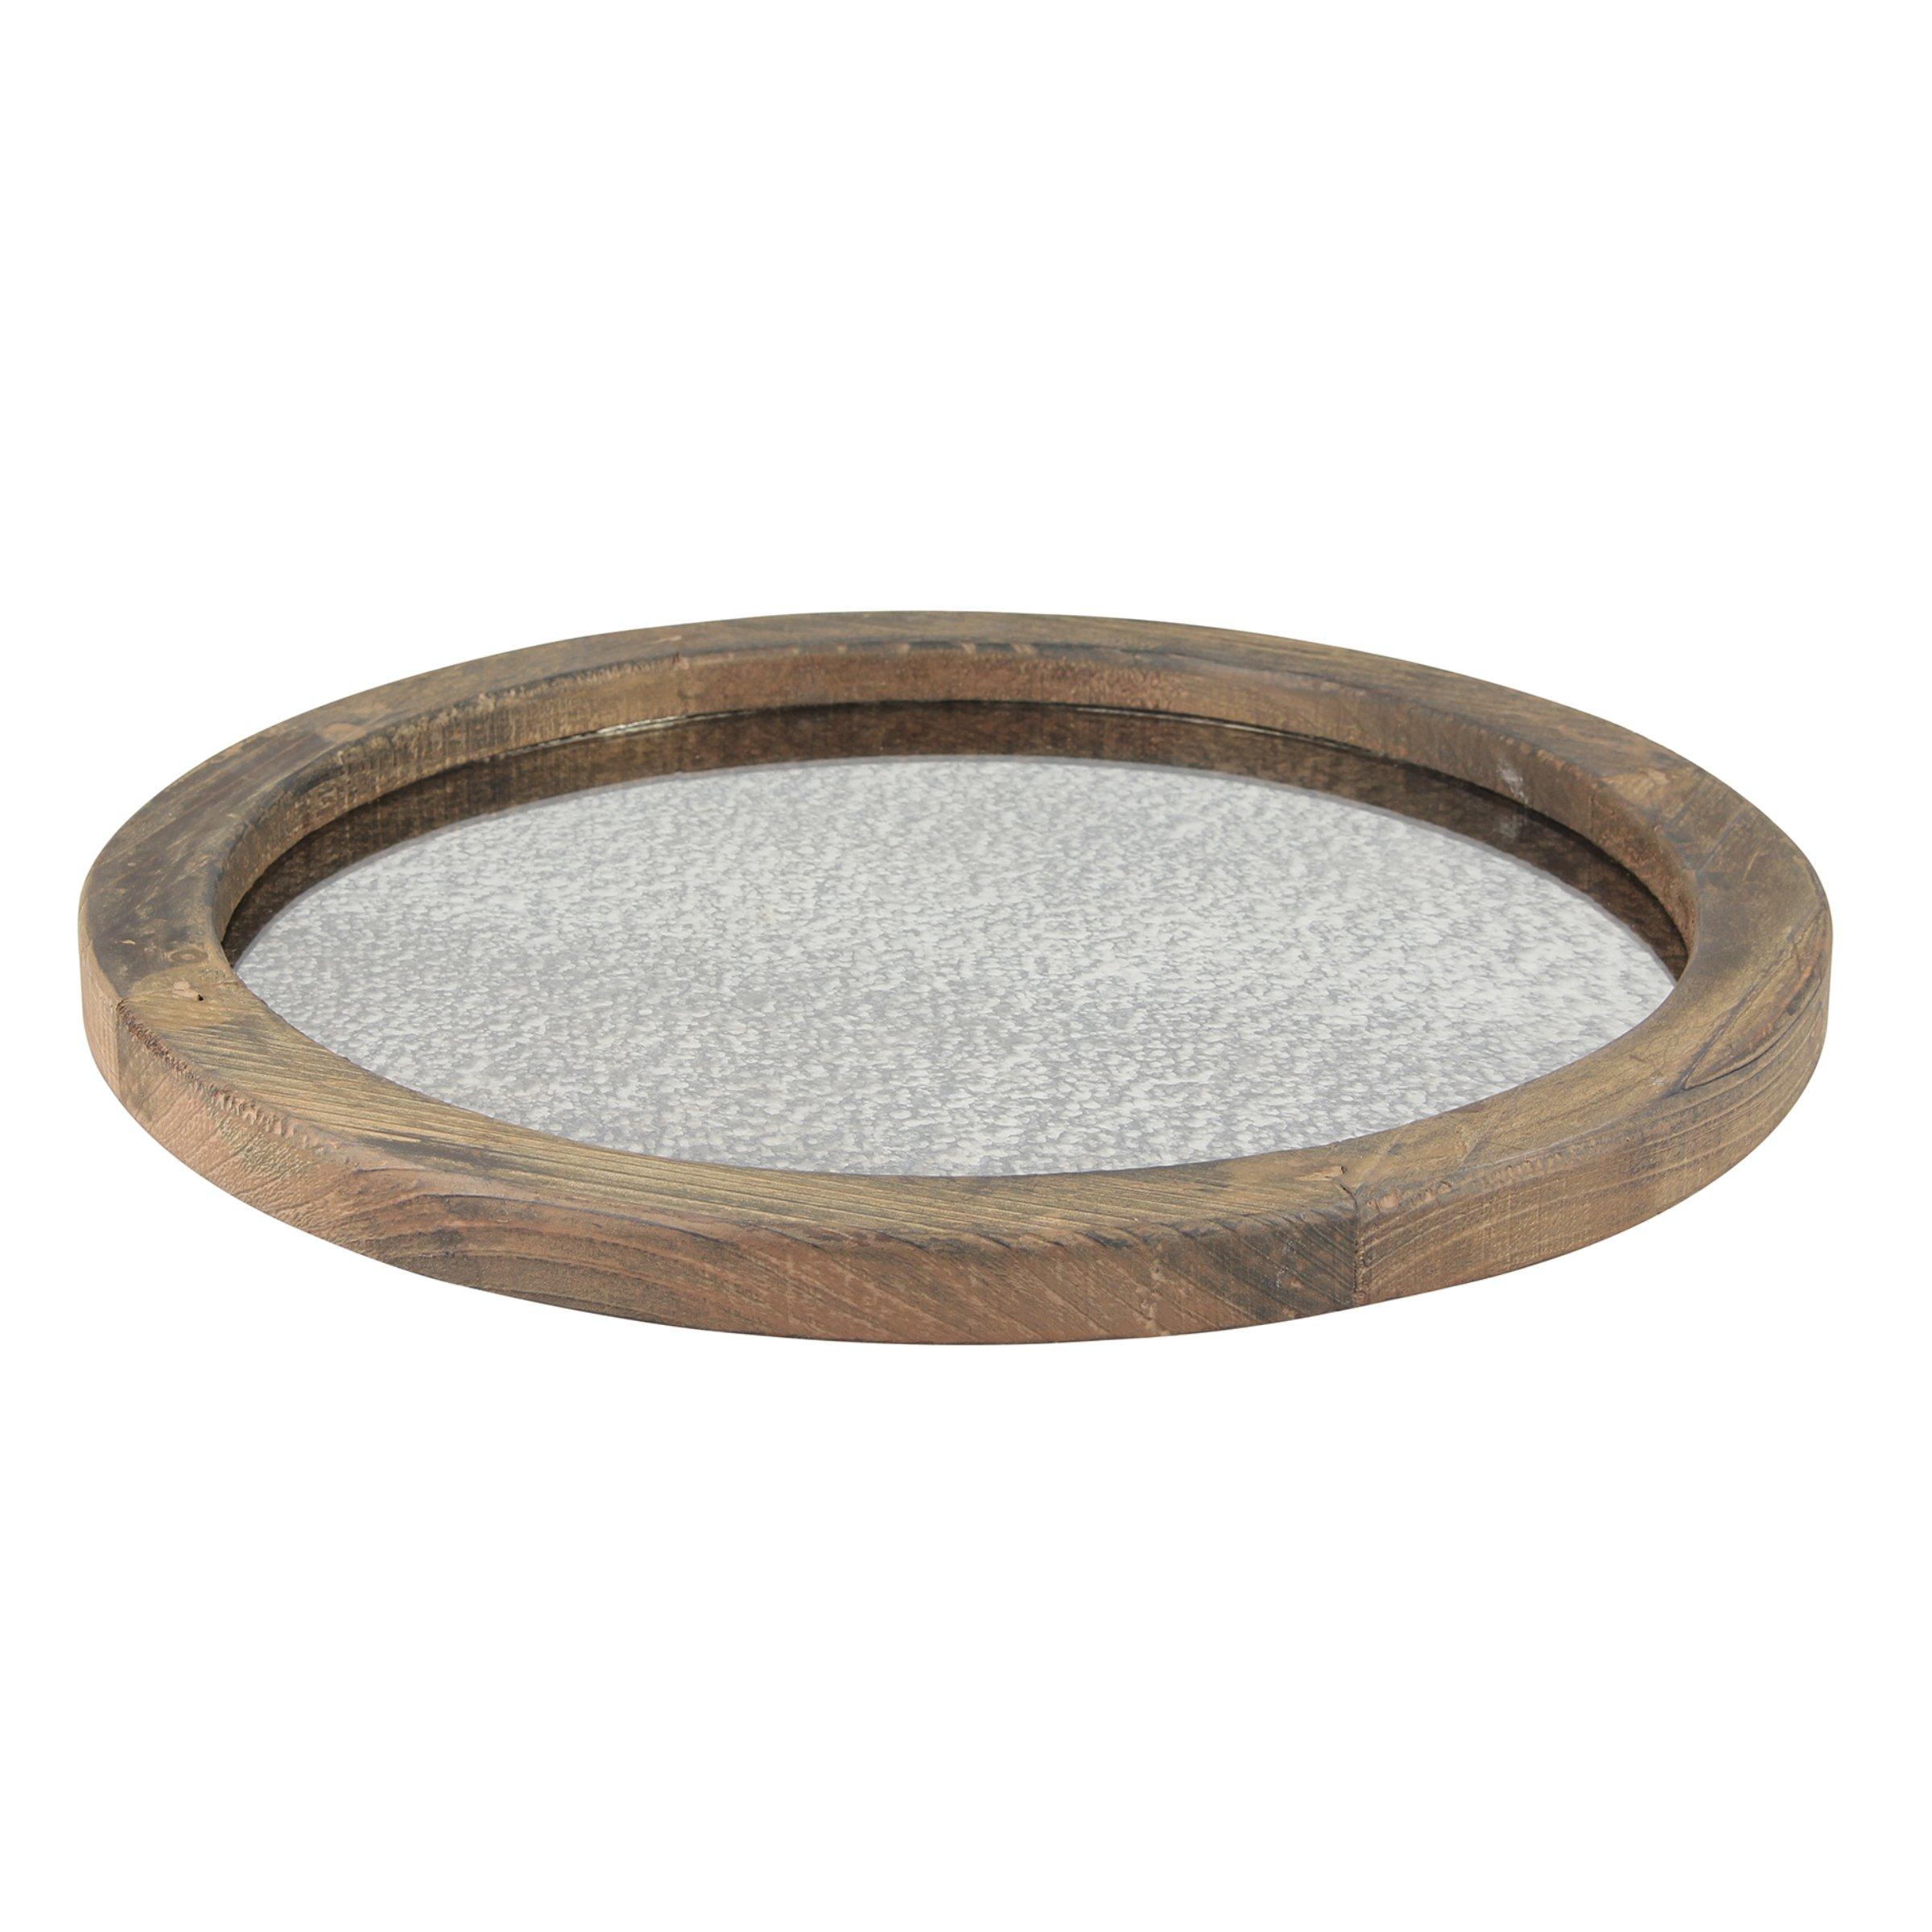 Stonebriar Round Natural Wood Tray with Antique Mirror